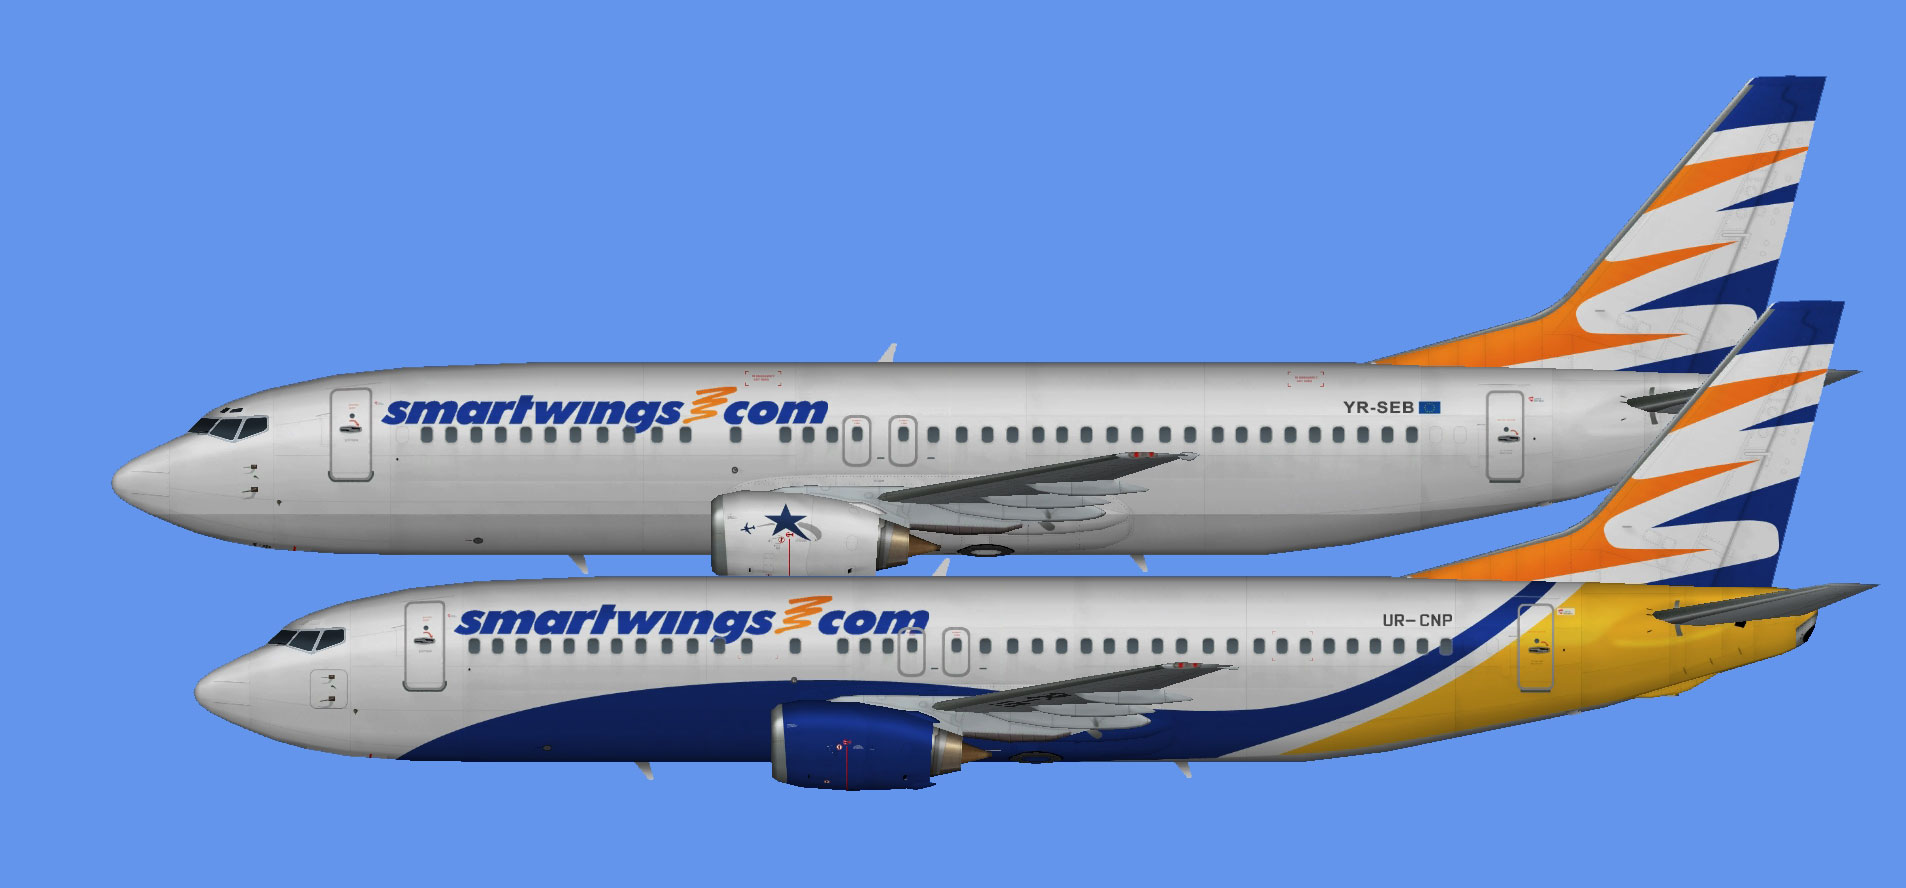 SmartWings 737-400 leases